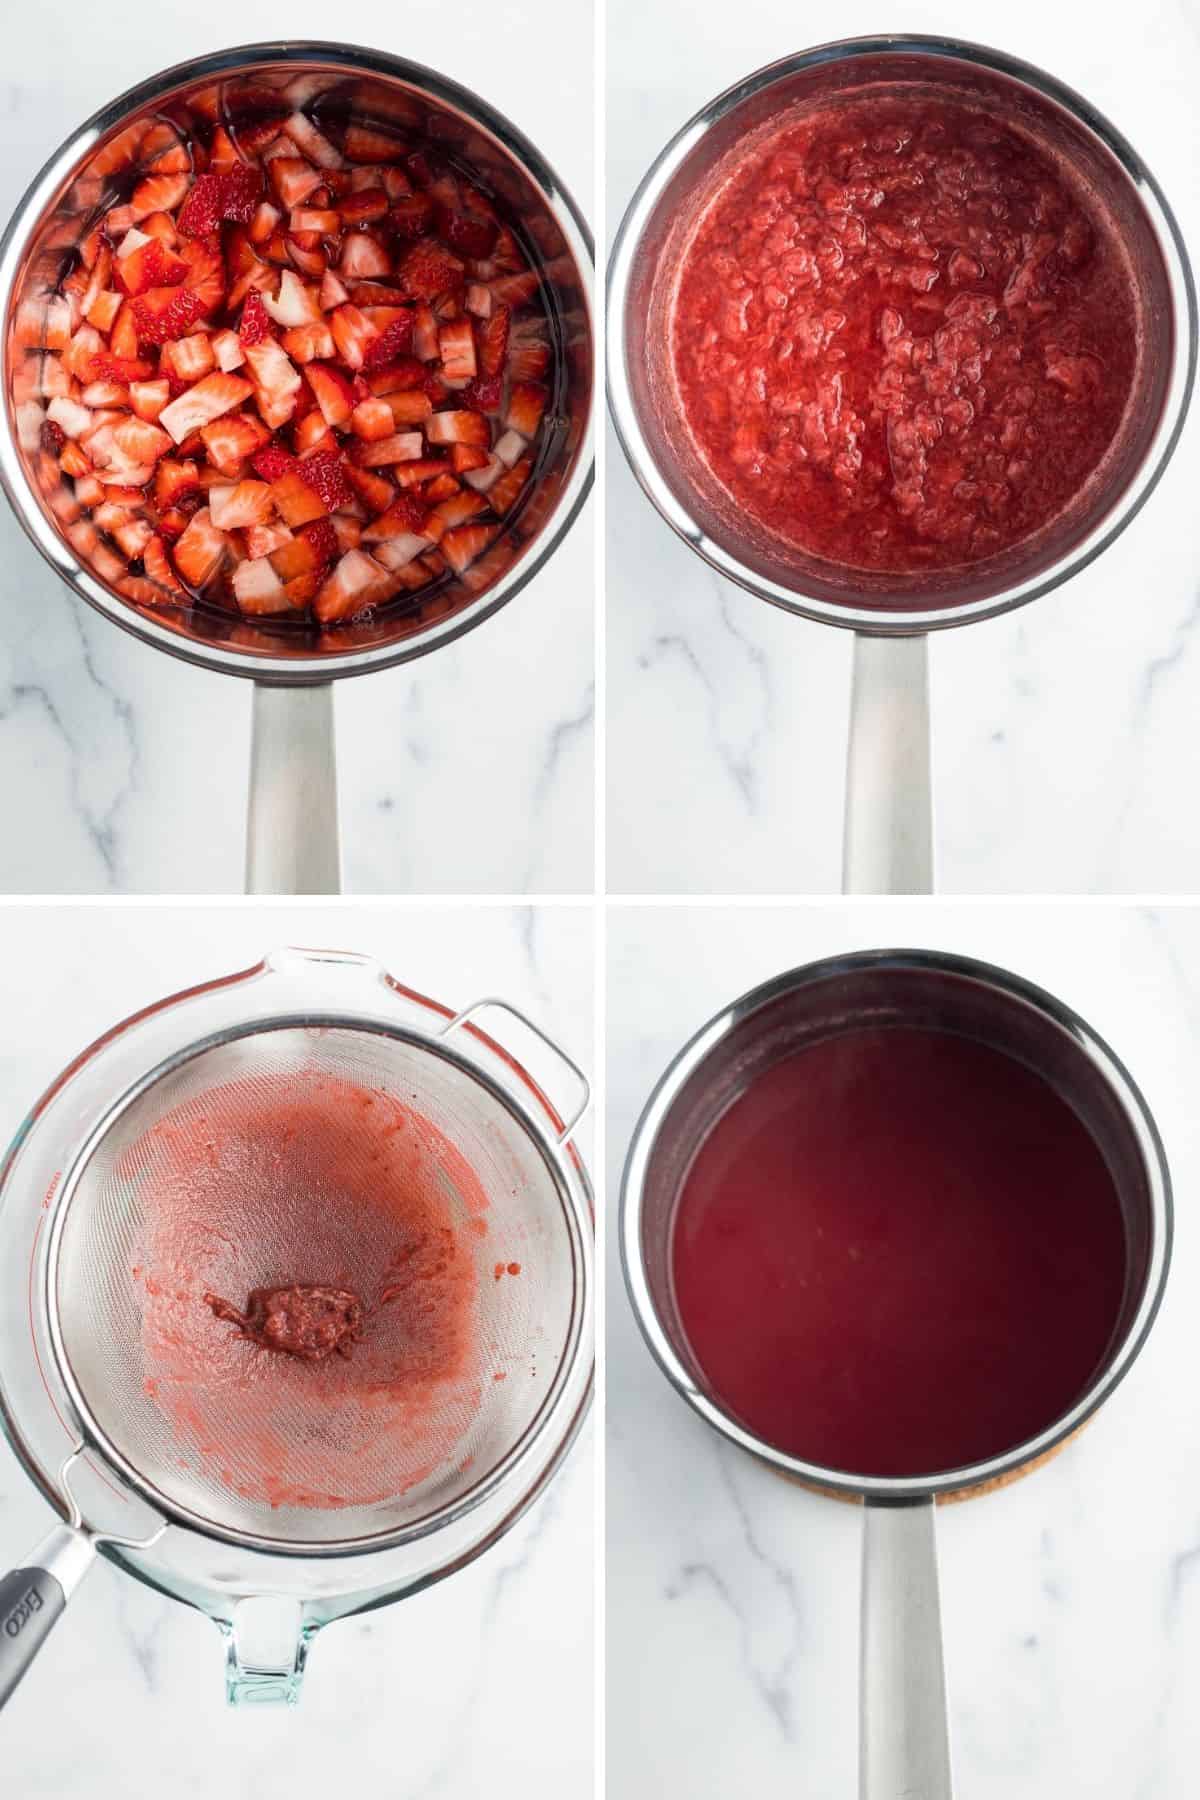 4 photos showing the process of making strawberry syrup for drinks